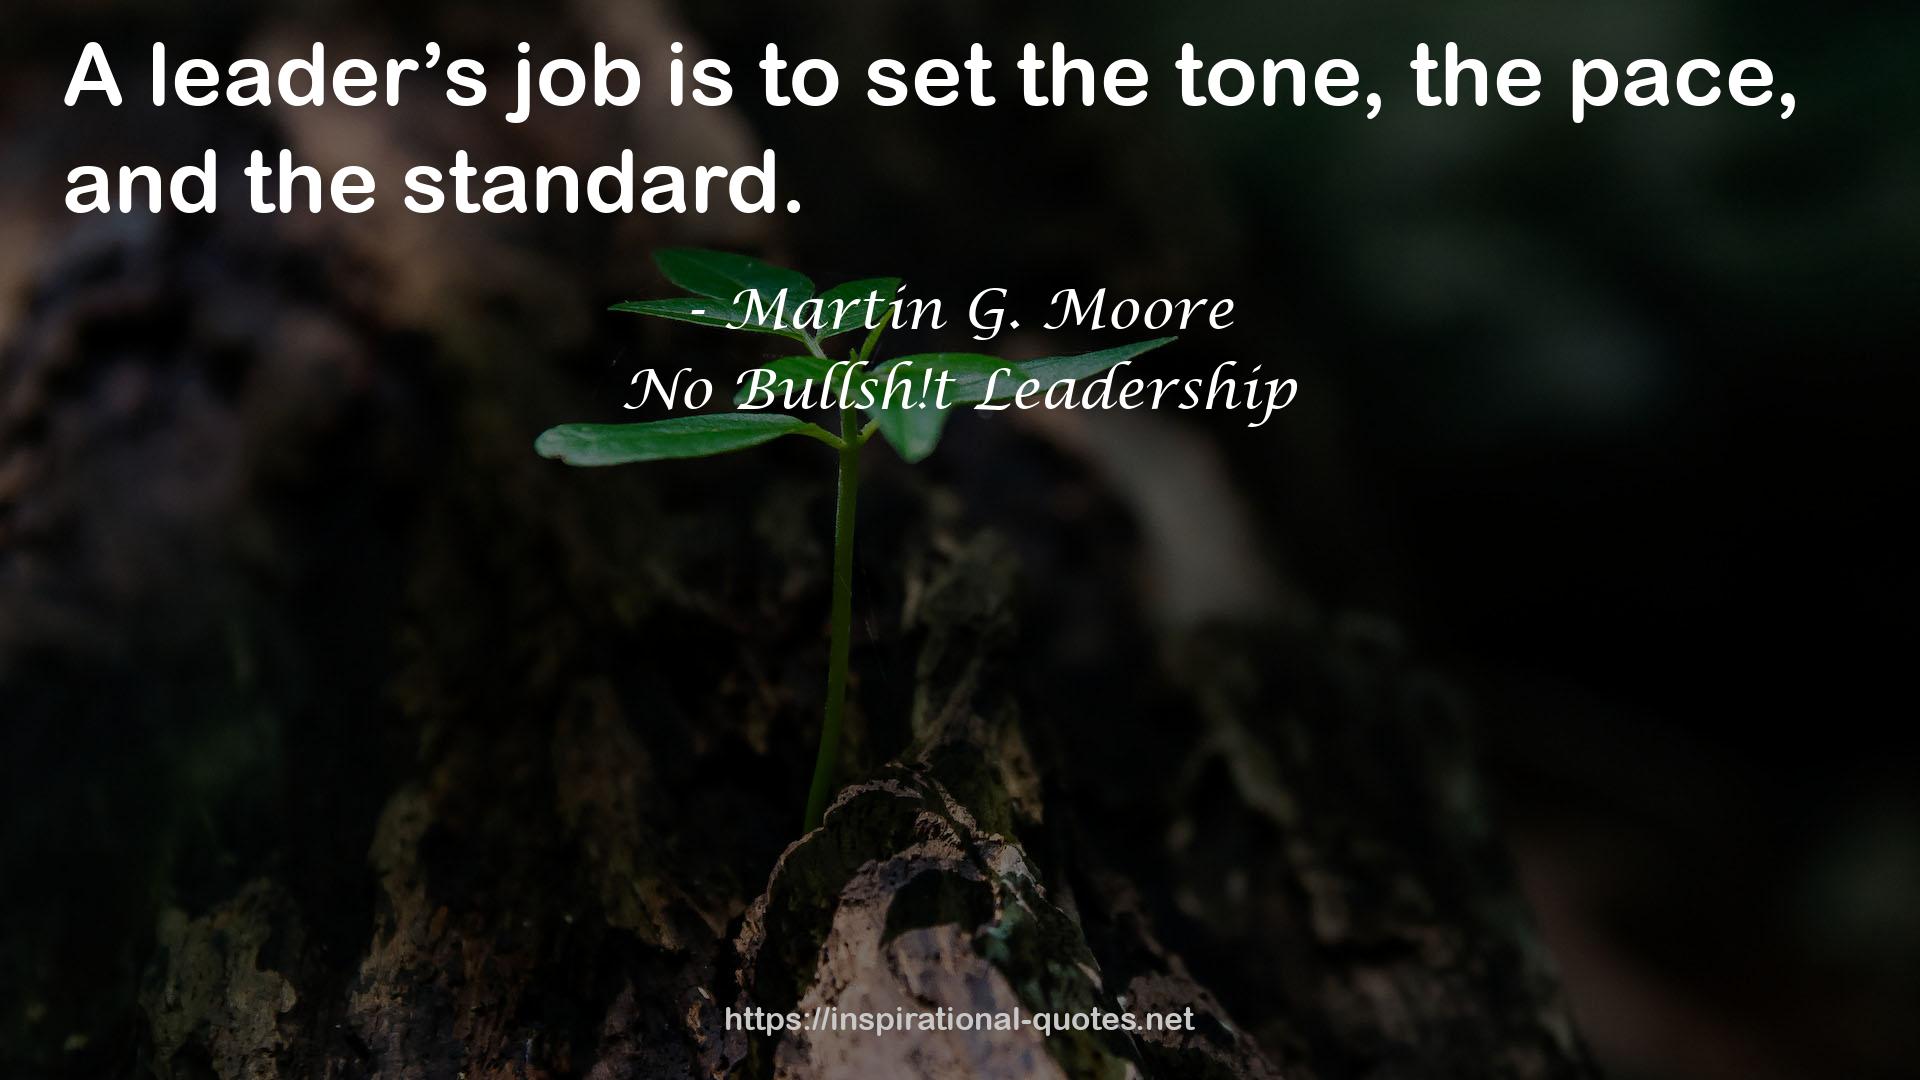 Martin G. Moore QUOTES